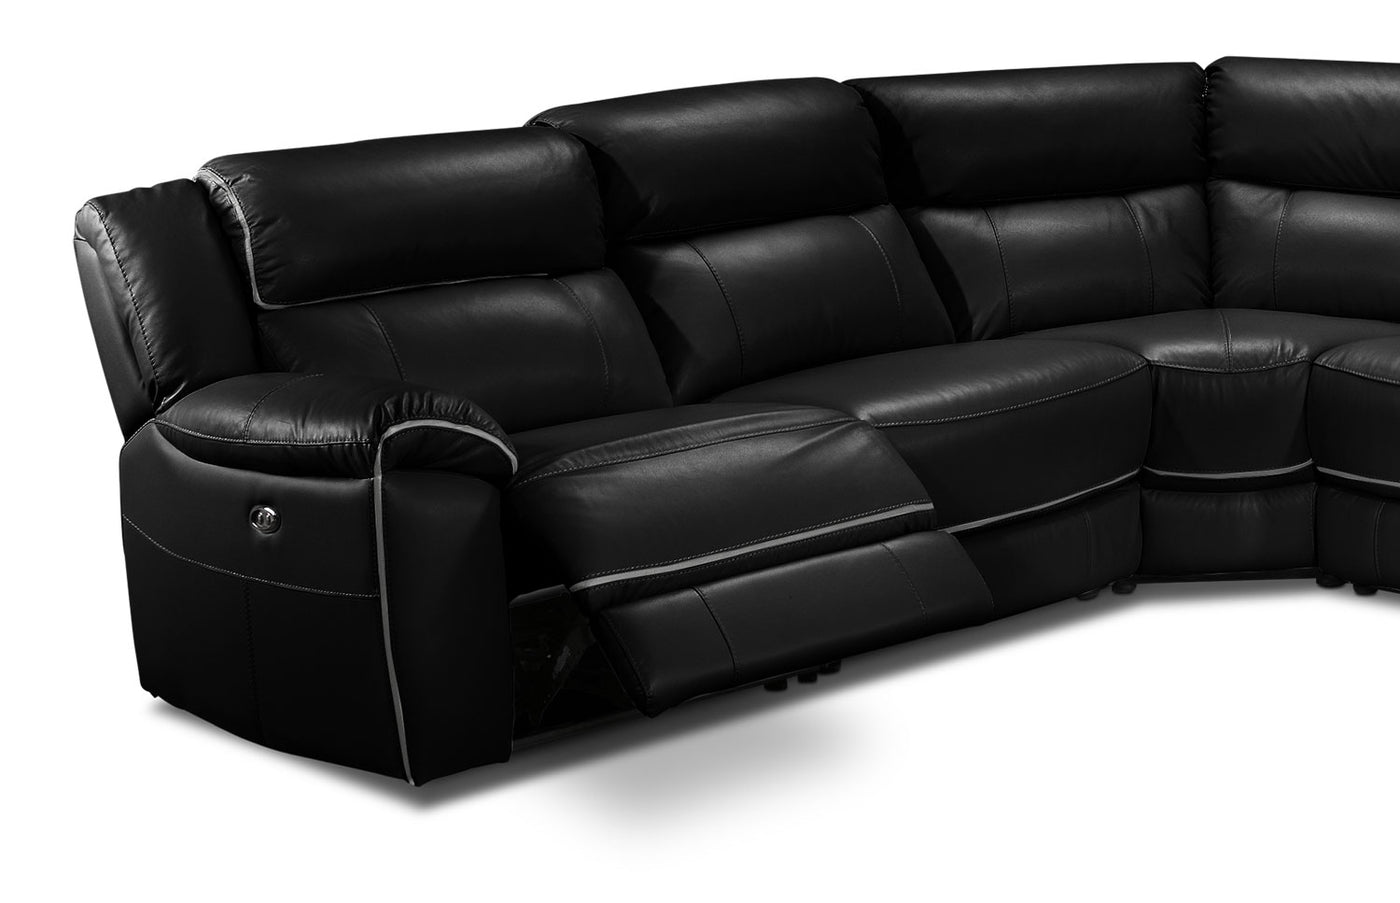 Holton Leather 6-Piece Sectional with Right-Facing Chaise - Black